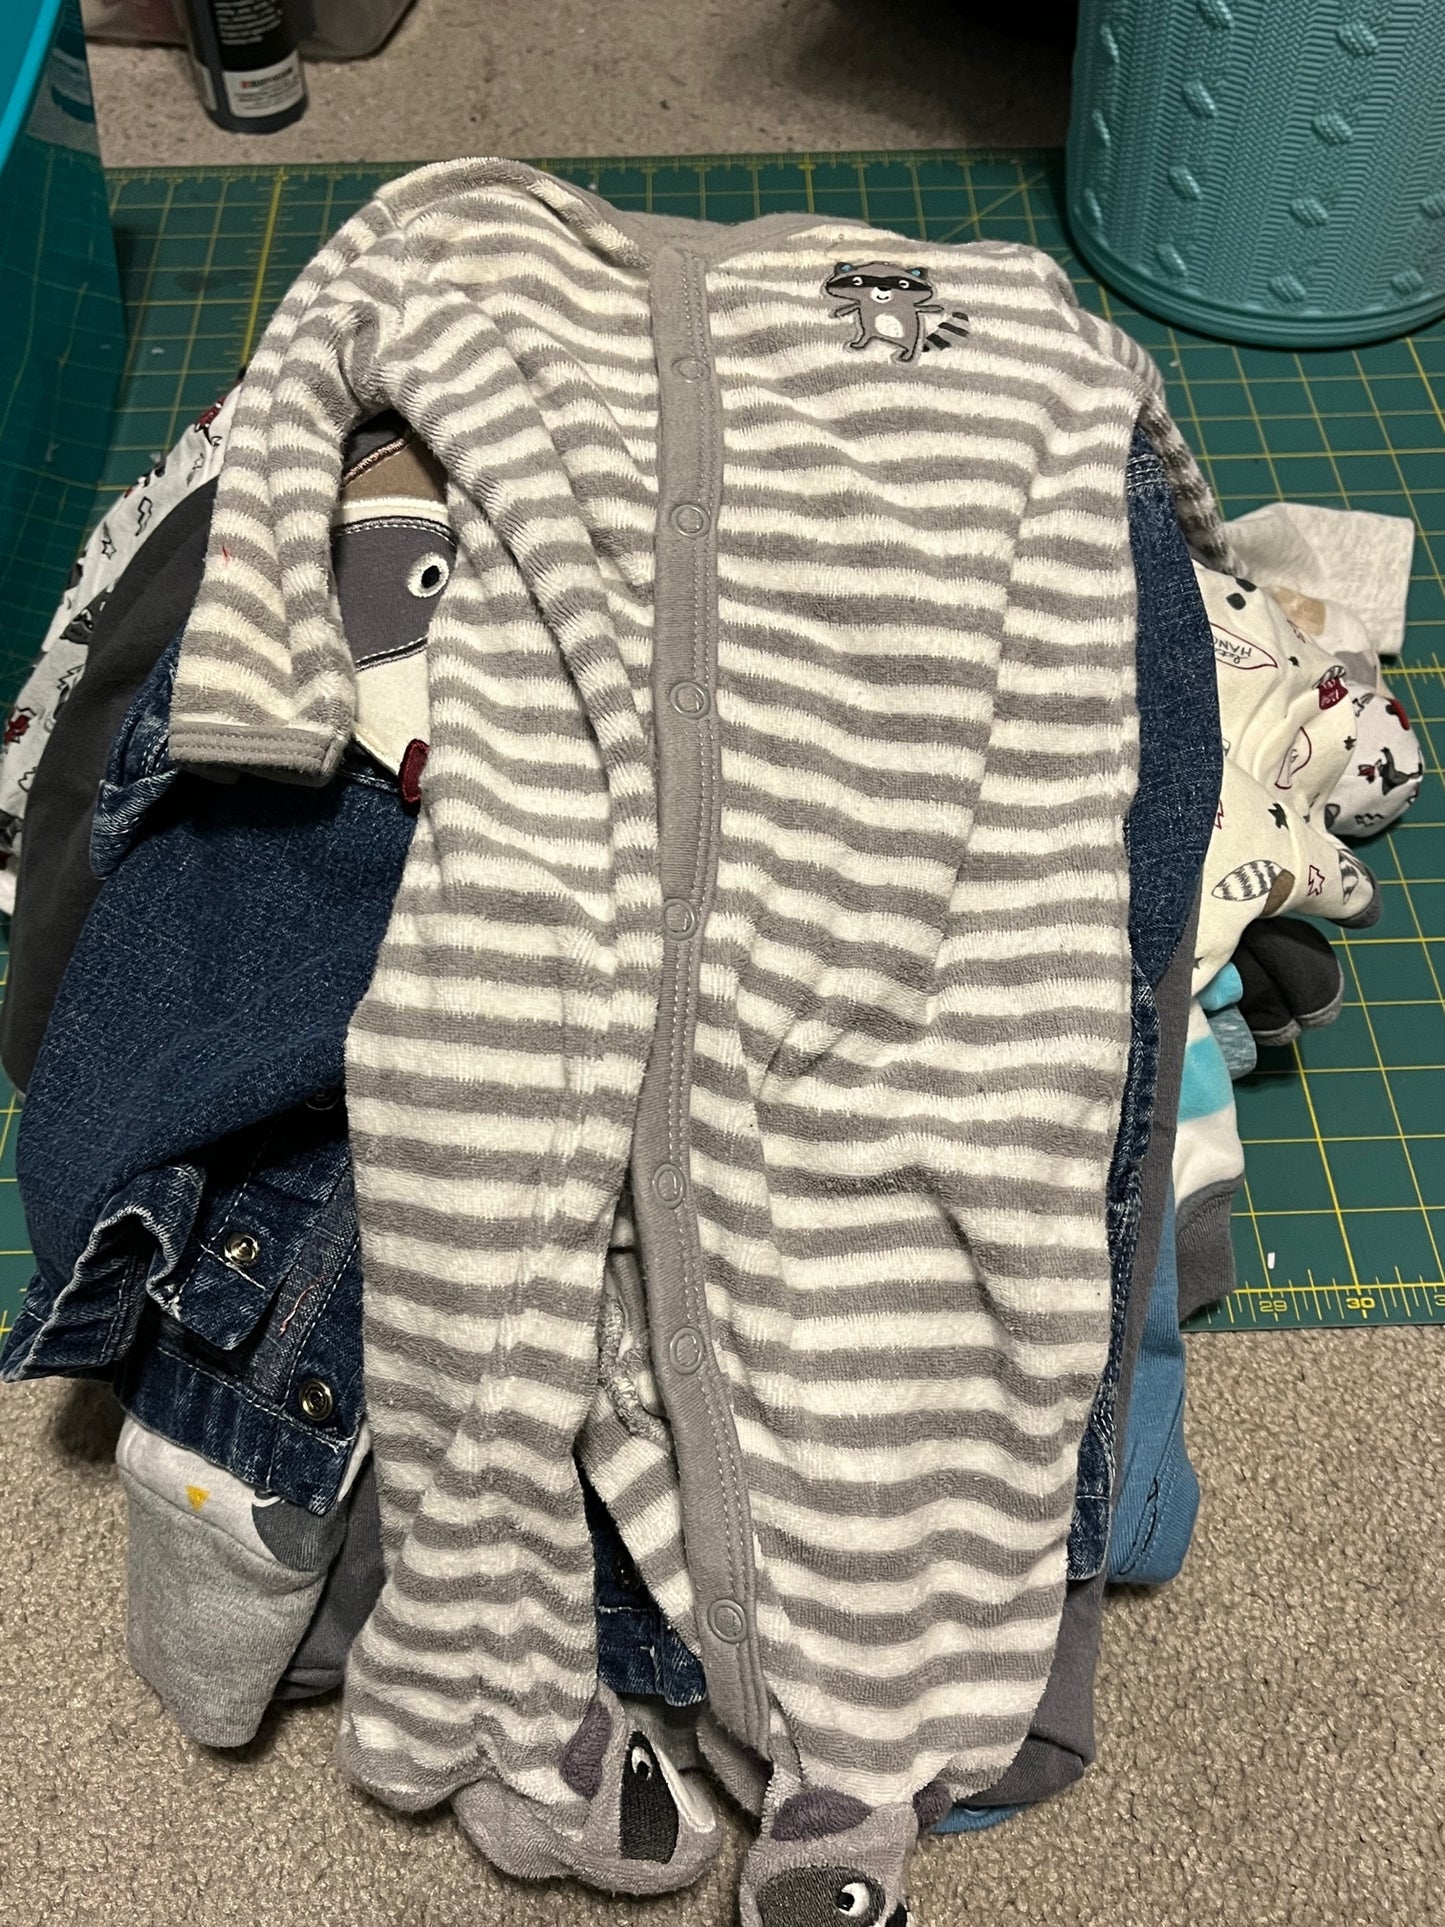 baby clothes used for the raccoon themed quilt